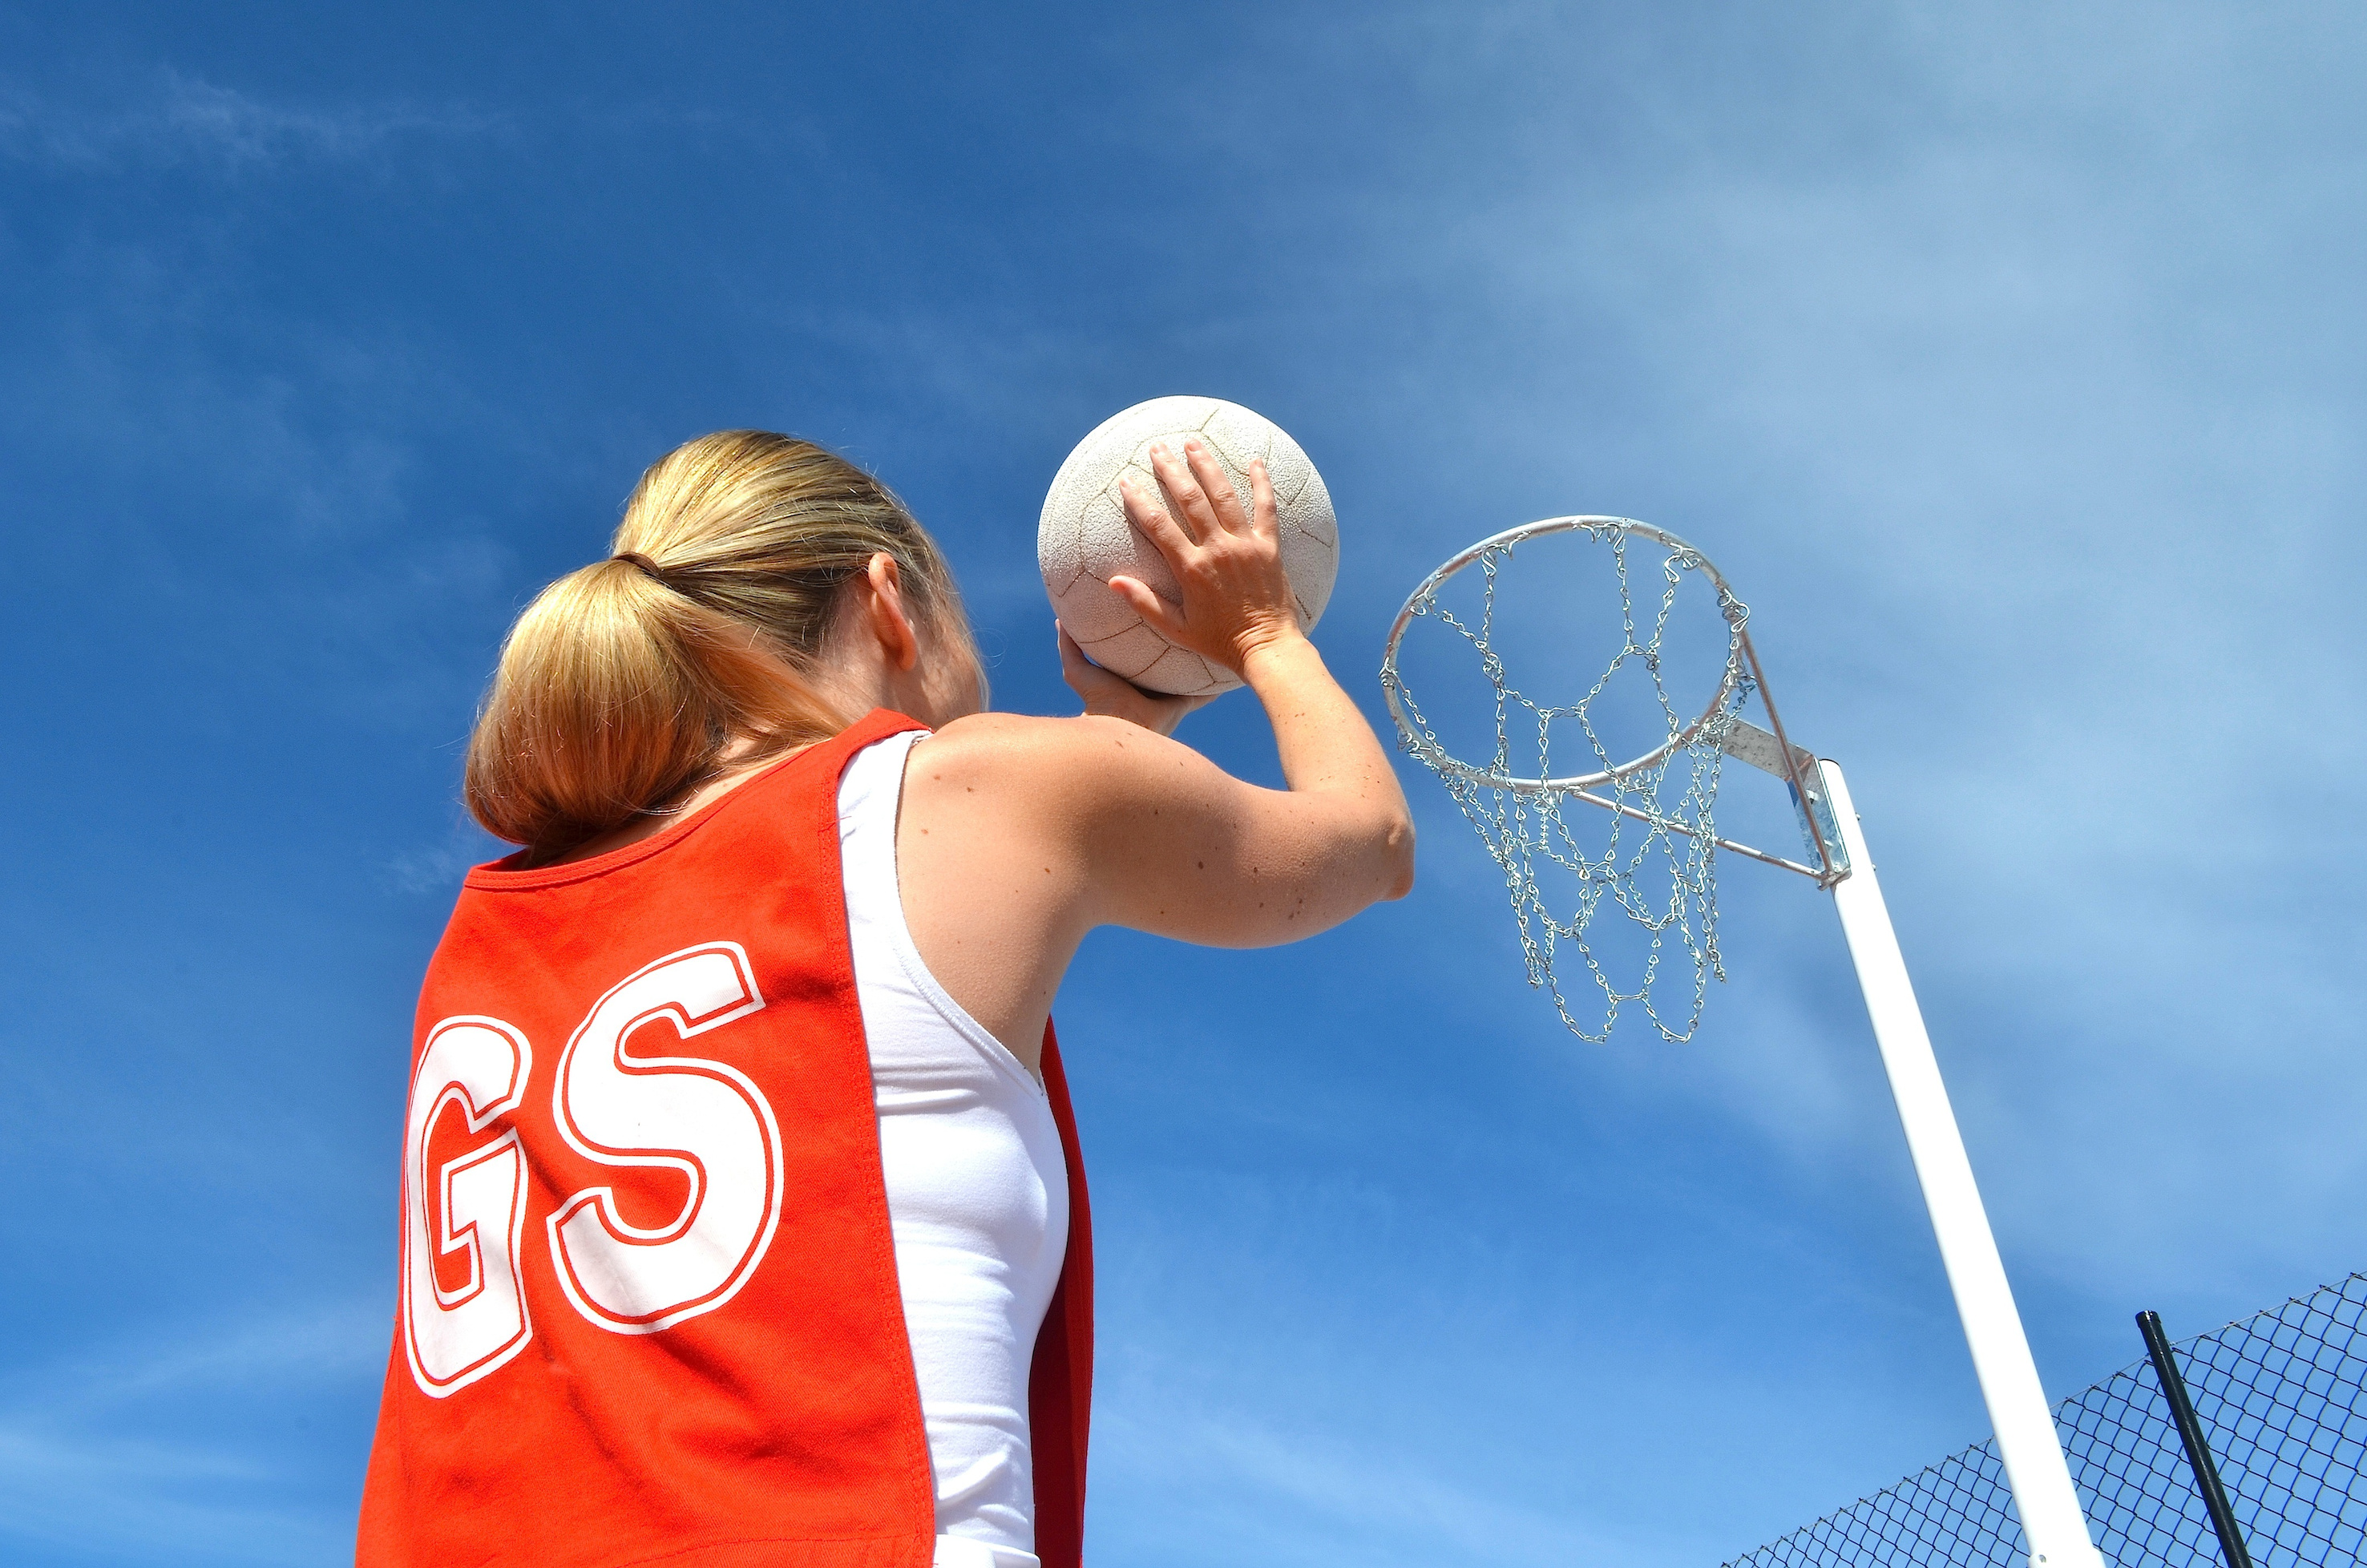 Taking a shot at goal in netball